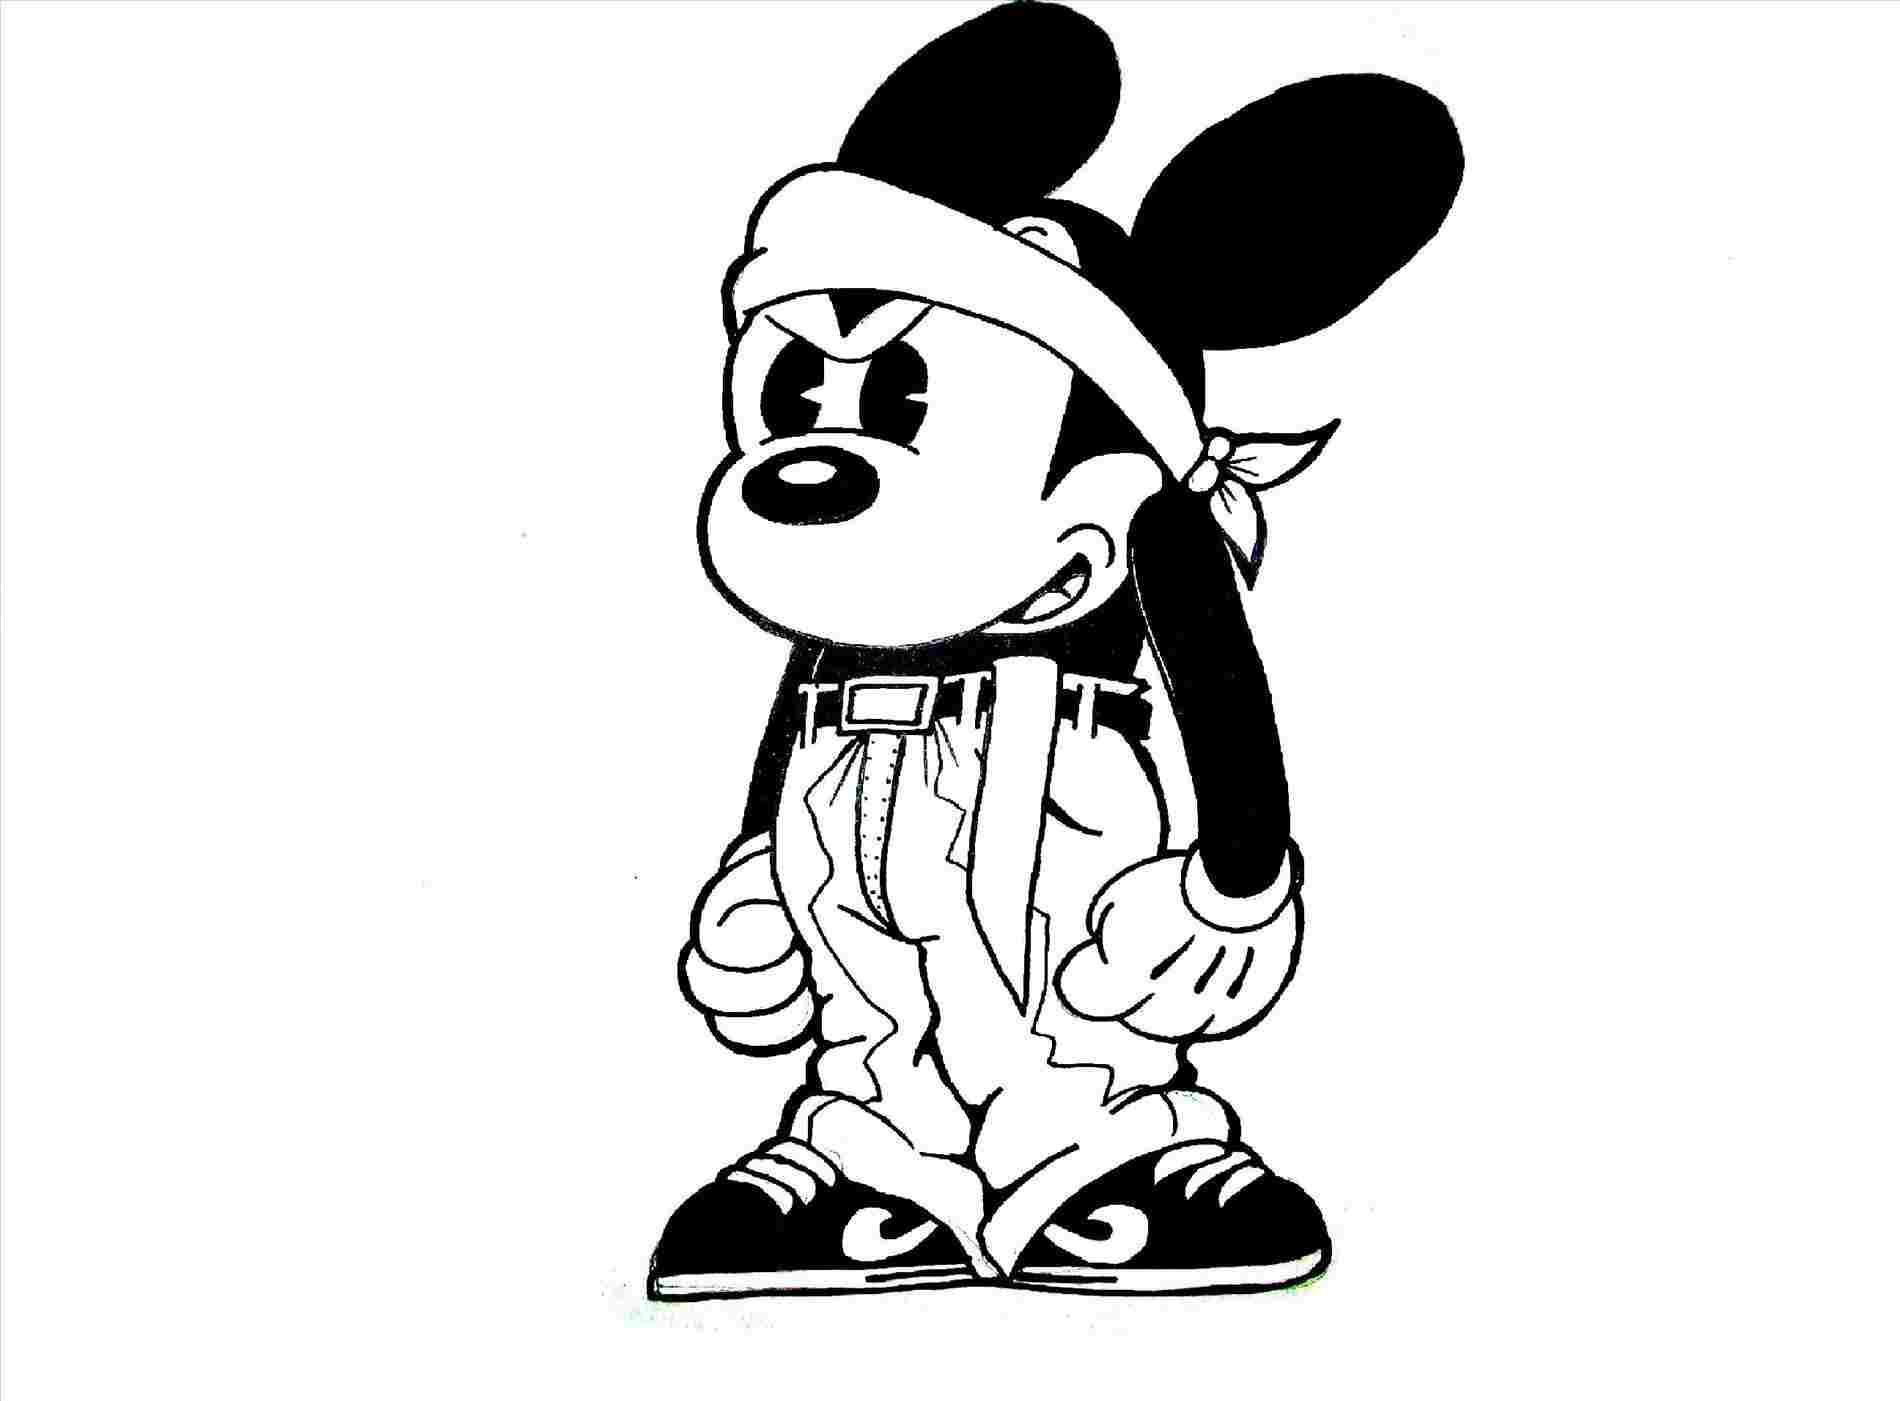 Mouse Cool Drawings A Gangsta Mickey Mouse Chicano Mouse Drawings Cartoon Character